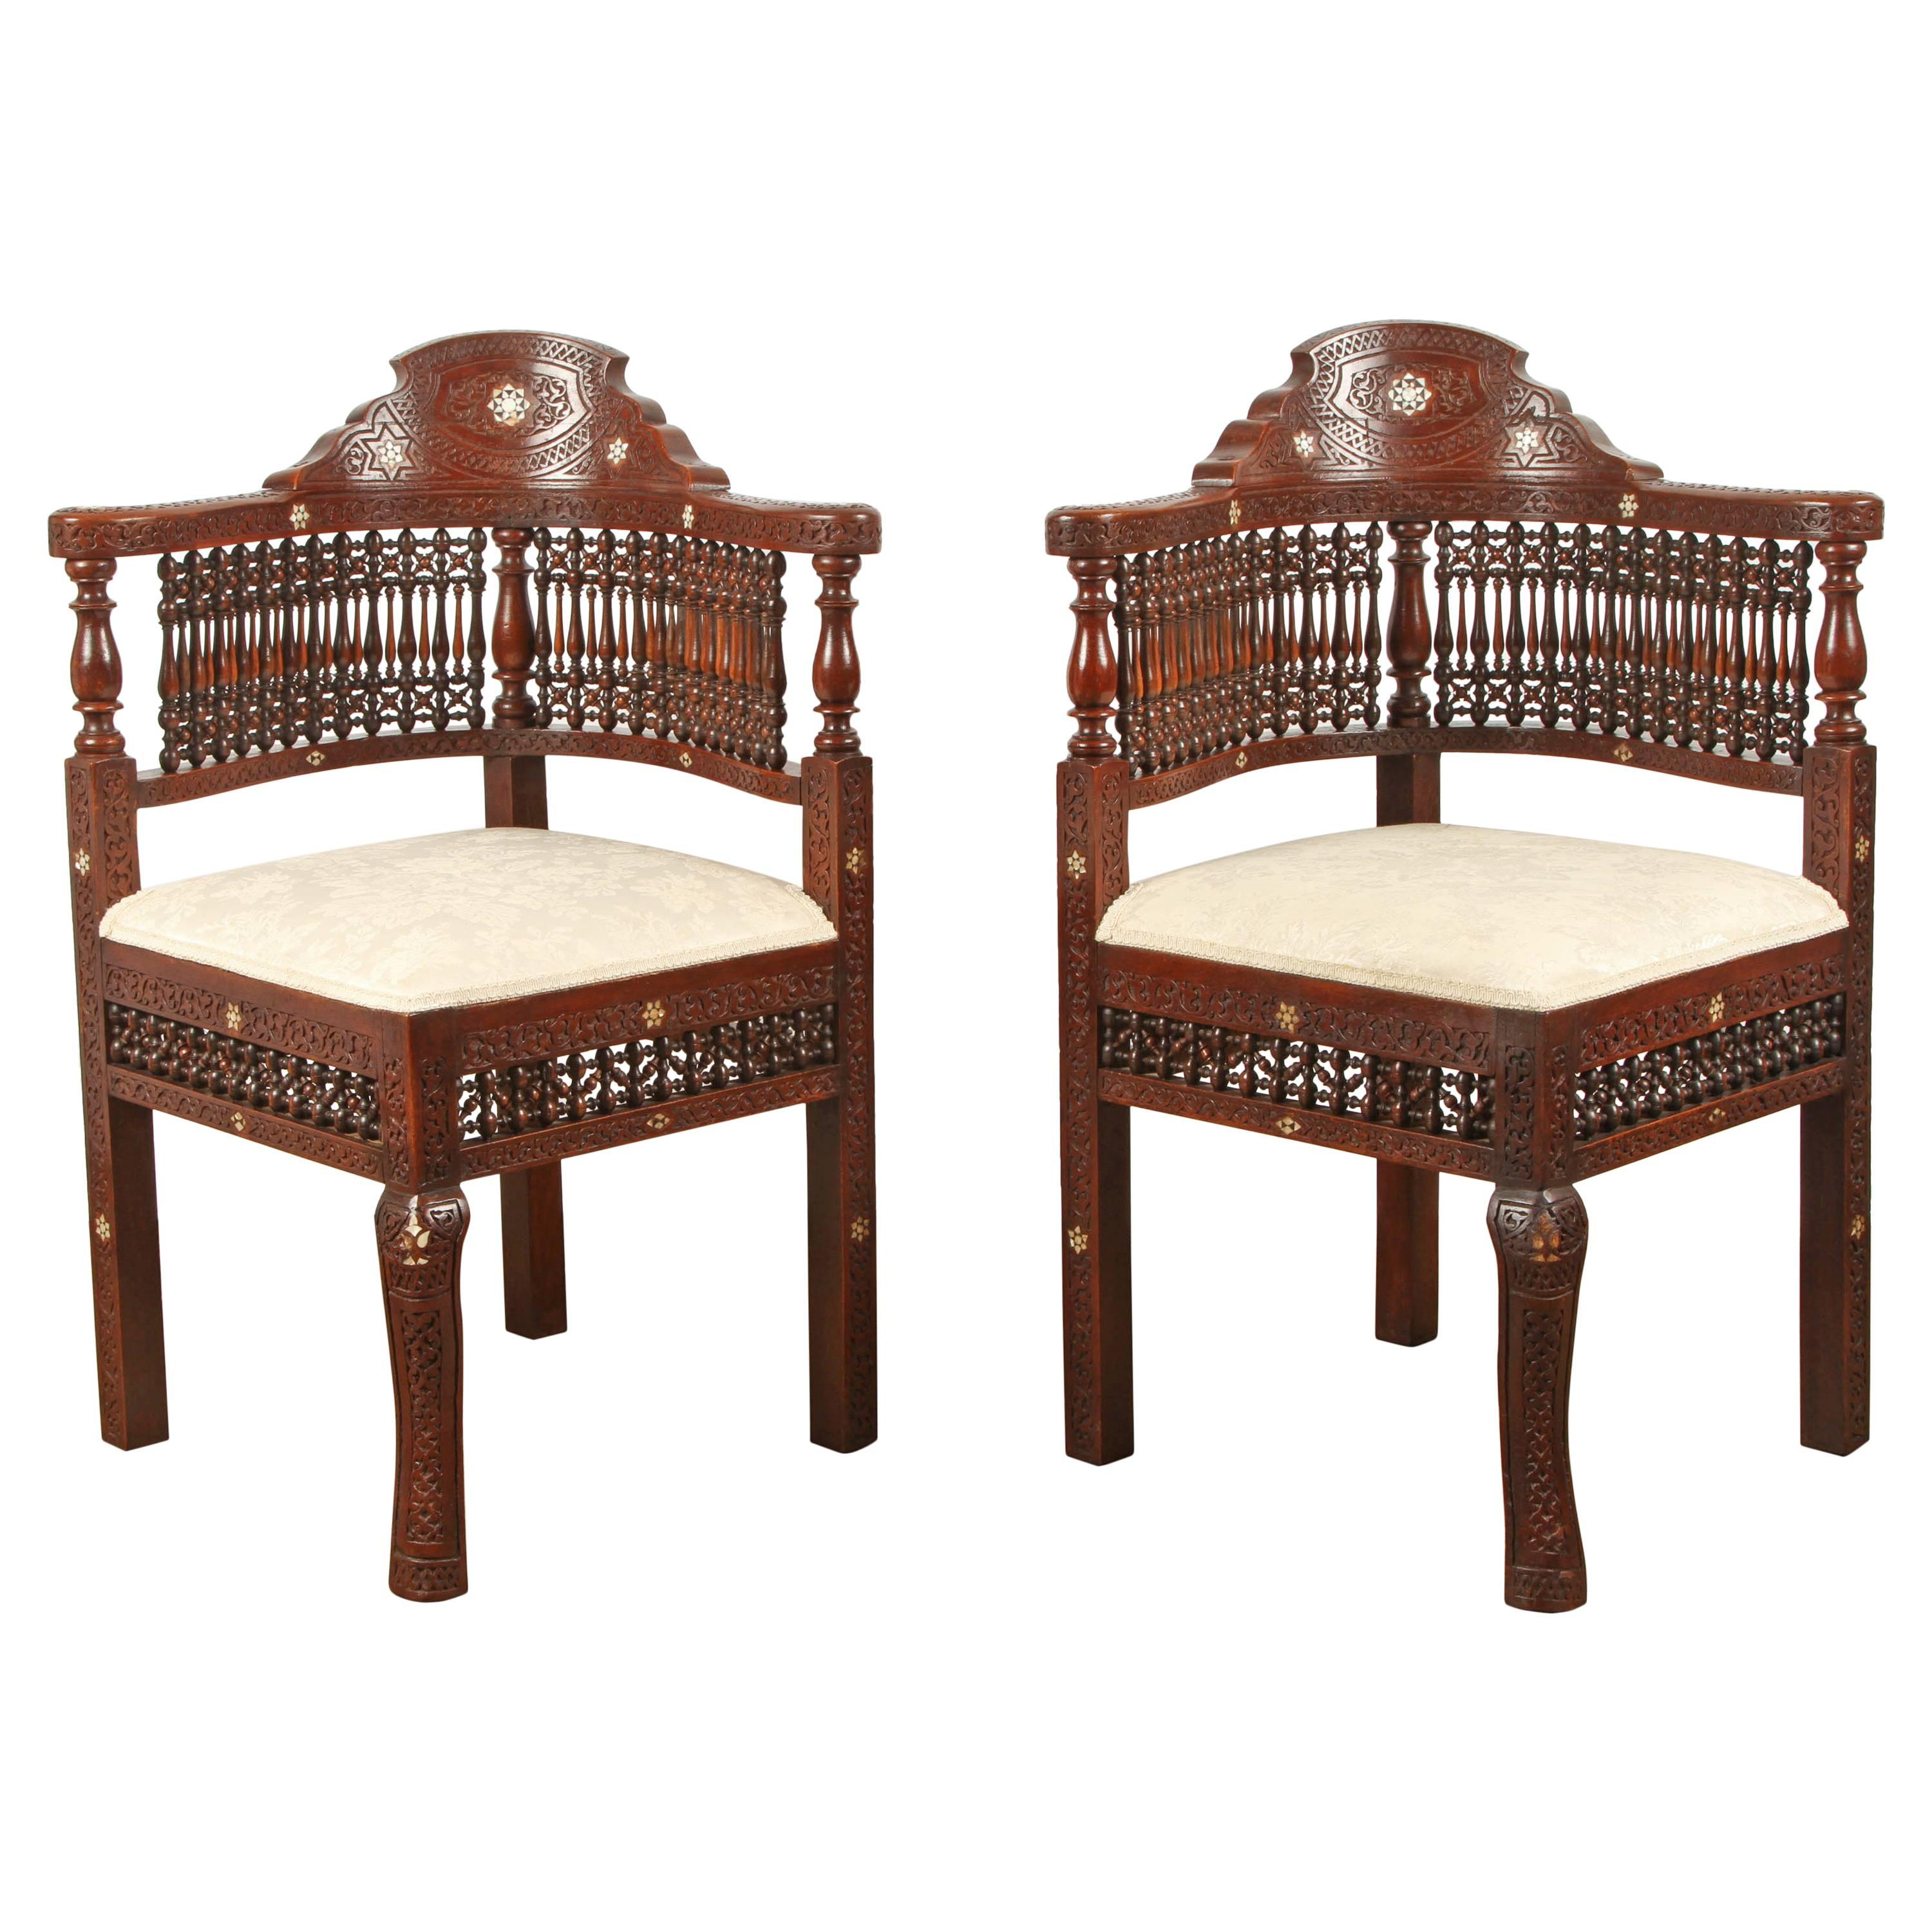 Pair of Moroccan Corner Chairs